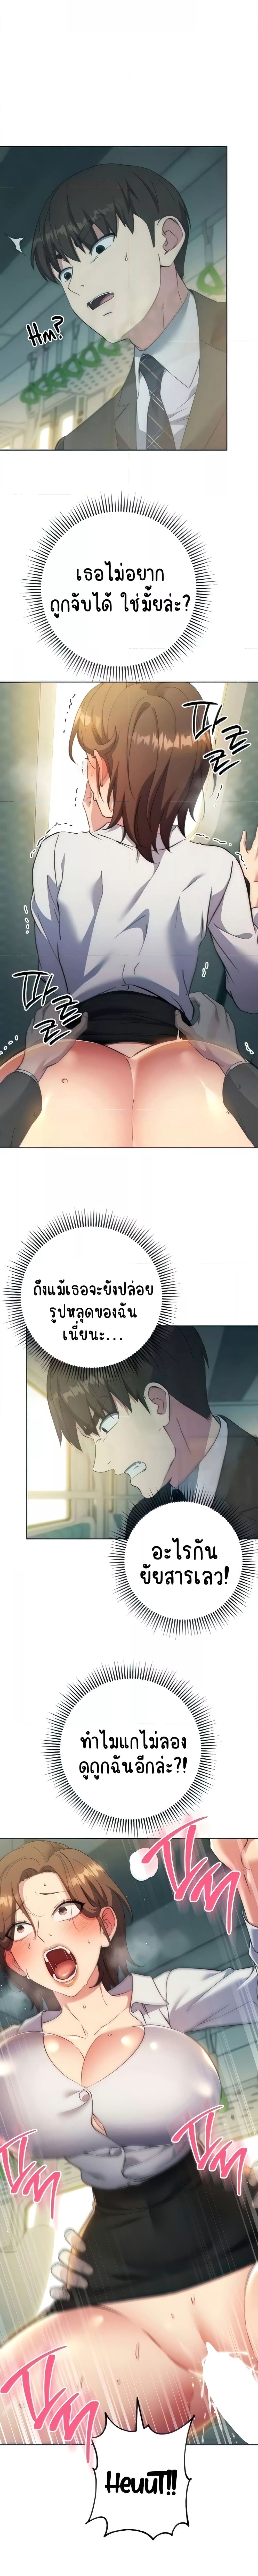 Outsider: The Invisible Man ตอนที่ 10 ภาพ 5